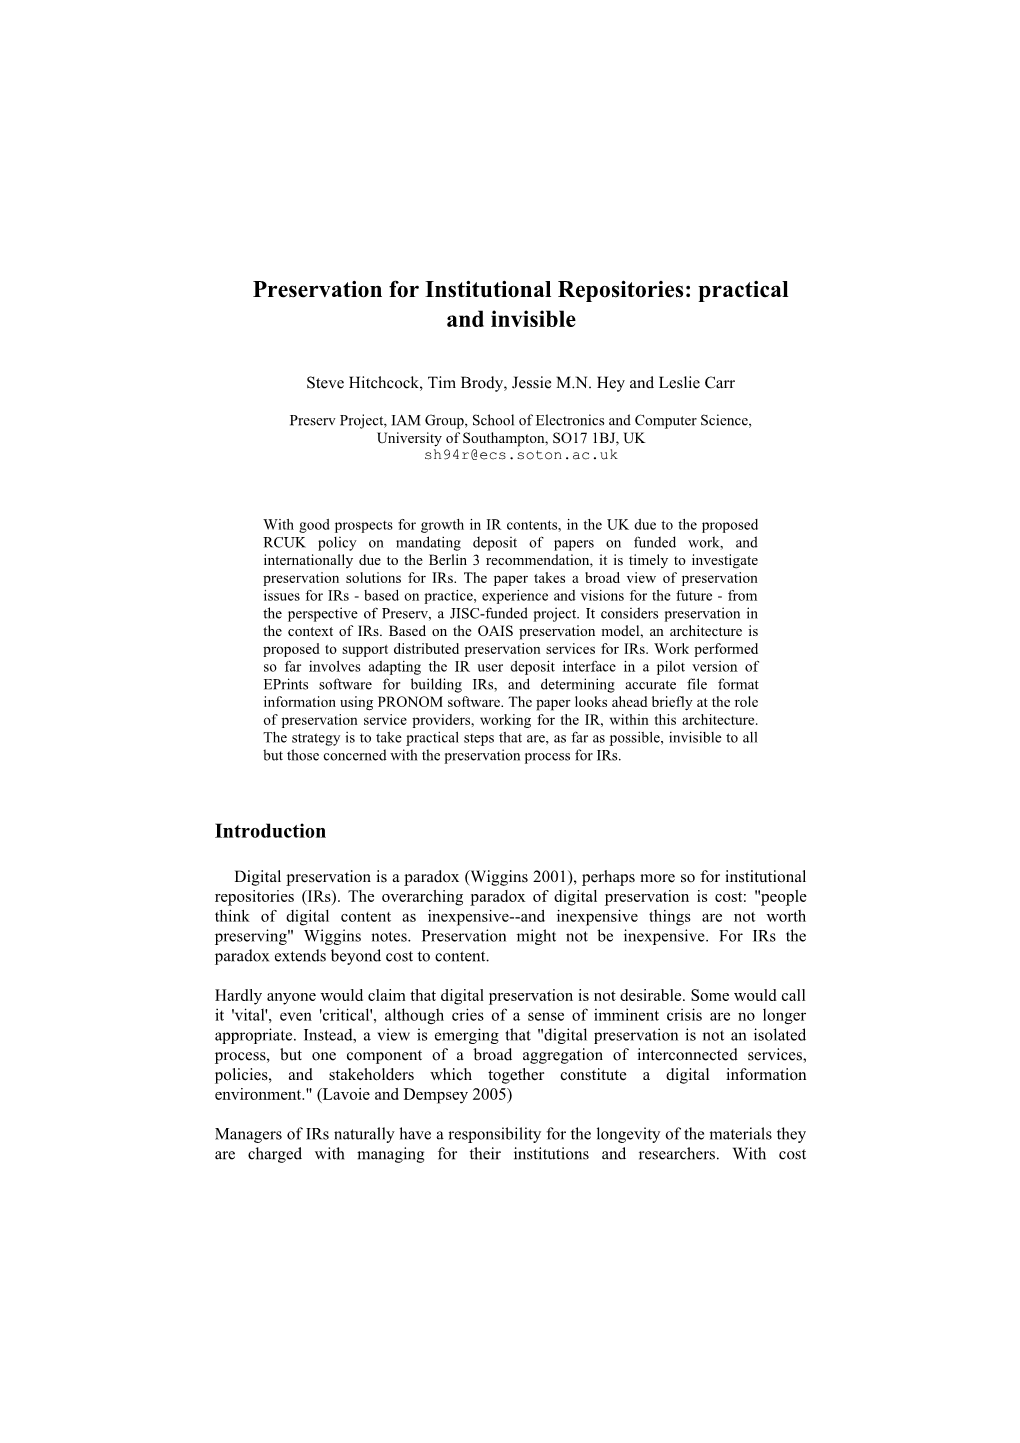 Preservation for Institutional Repositories: Practical and Invisible